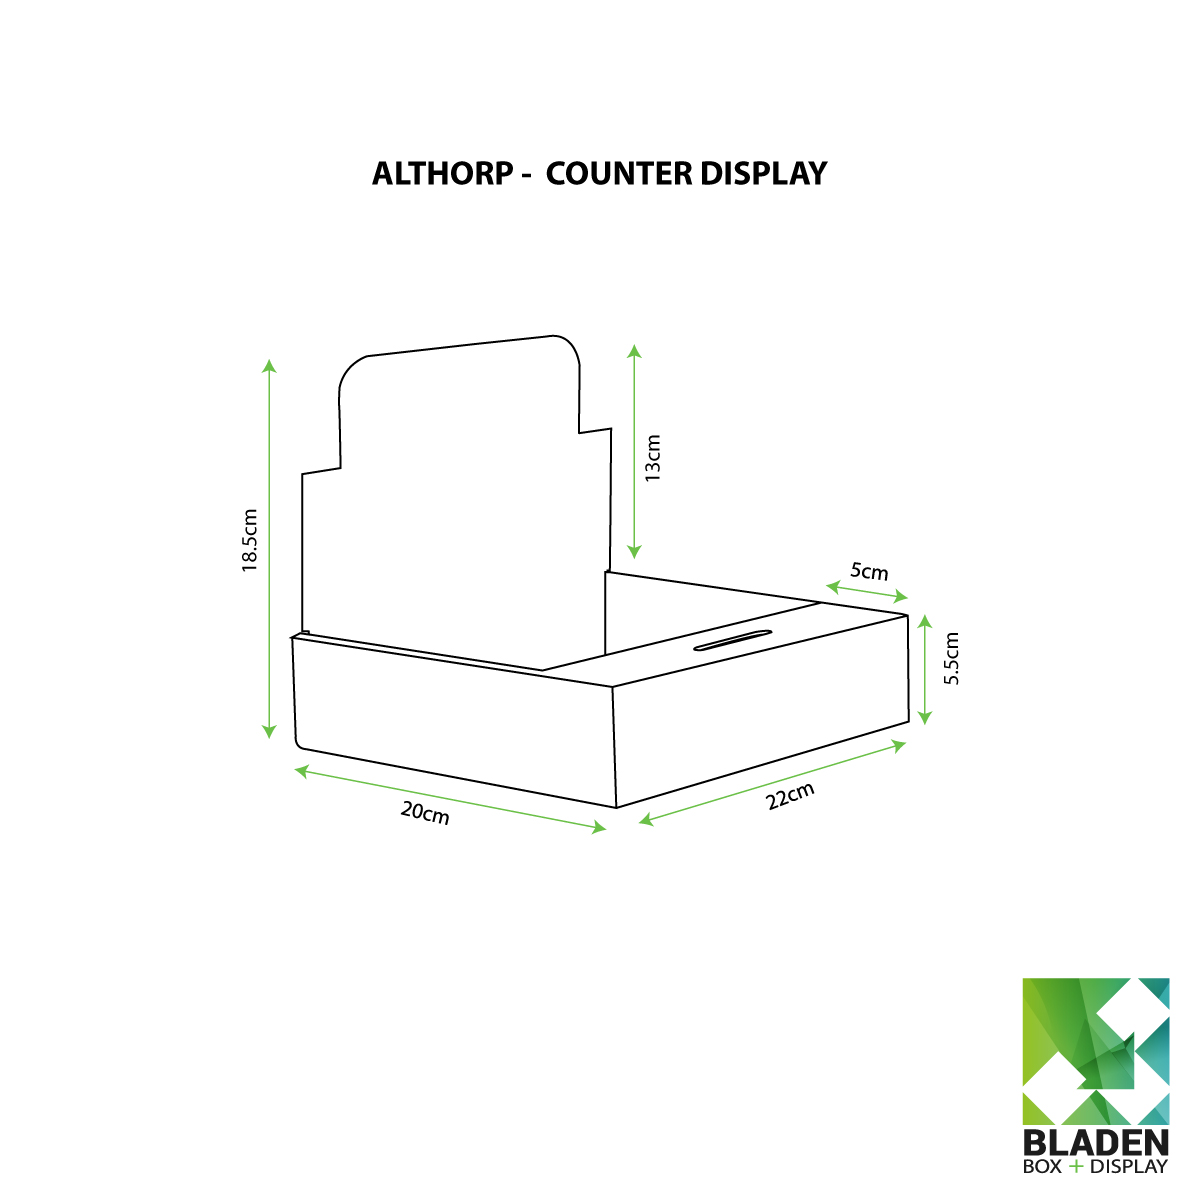 Counter Display Unit - Althorp Line Drawing